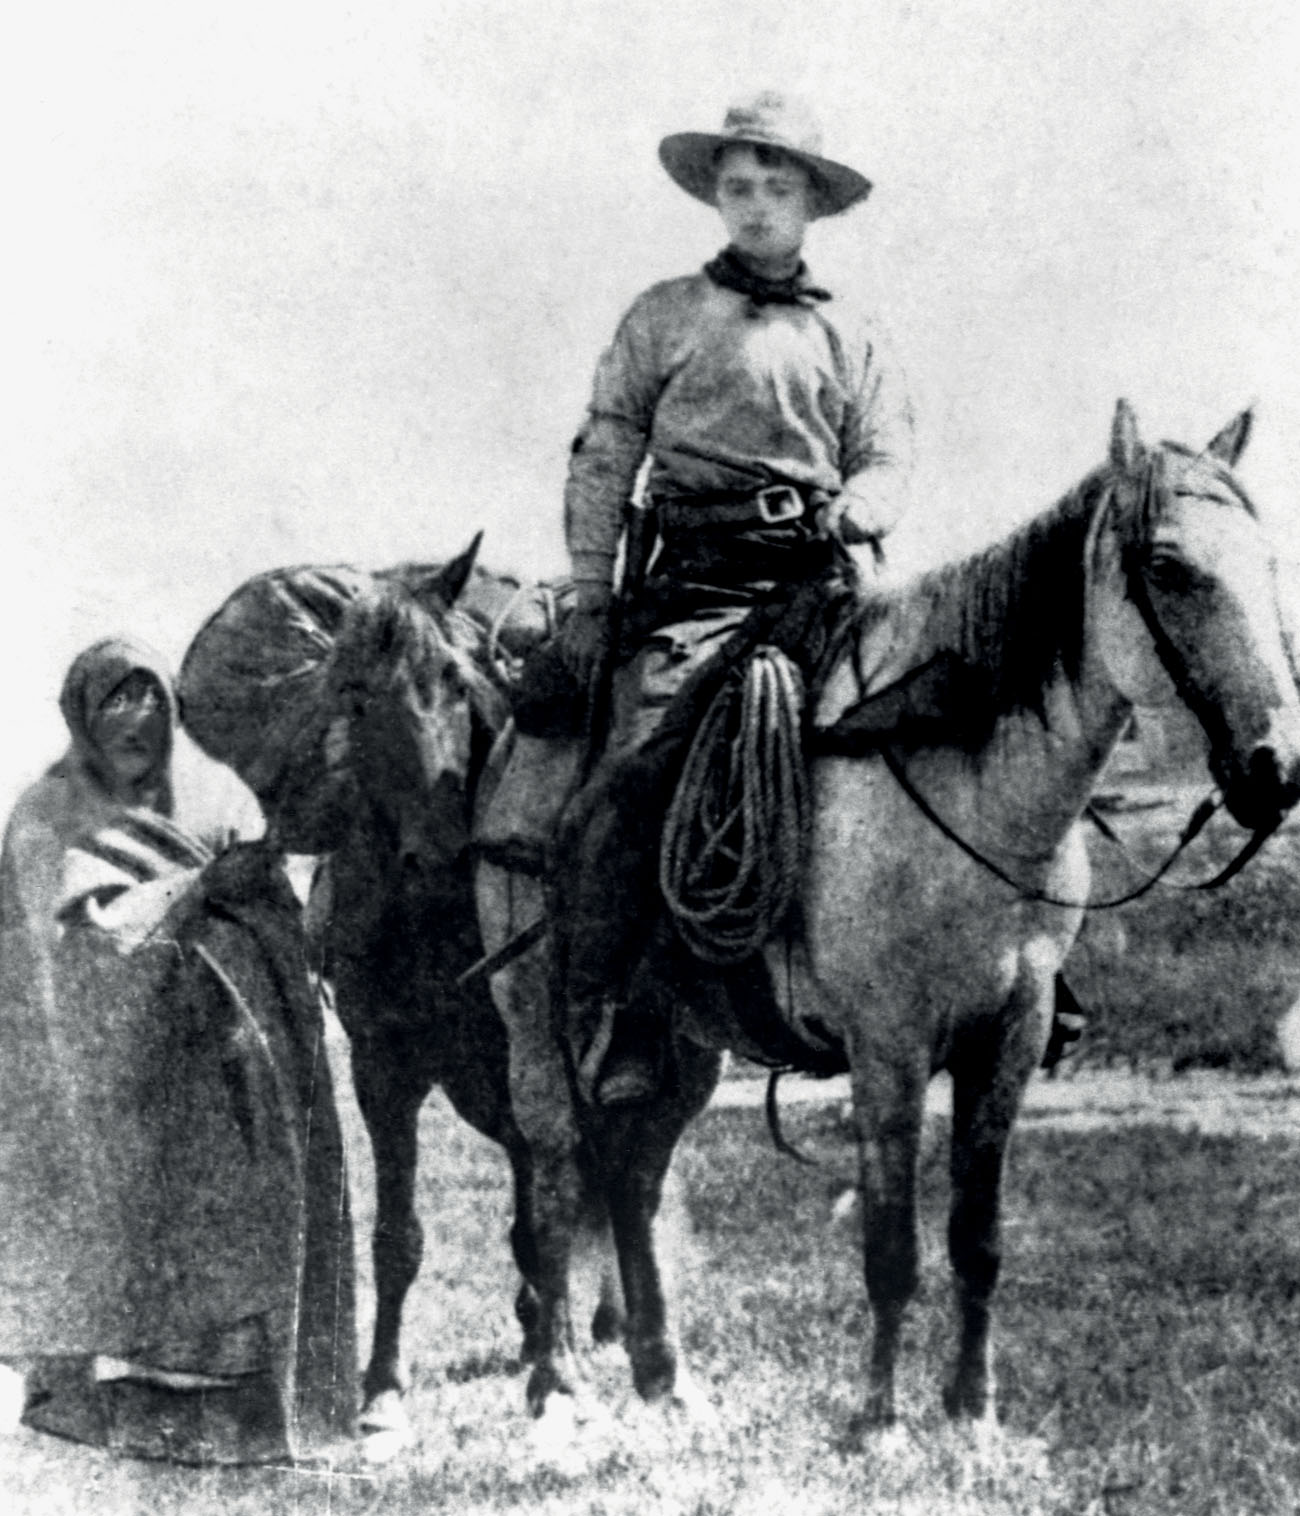 an off-duty pony express rider Riders used mochilas important equipment - photo 10